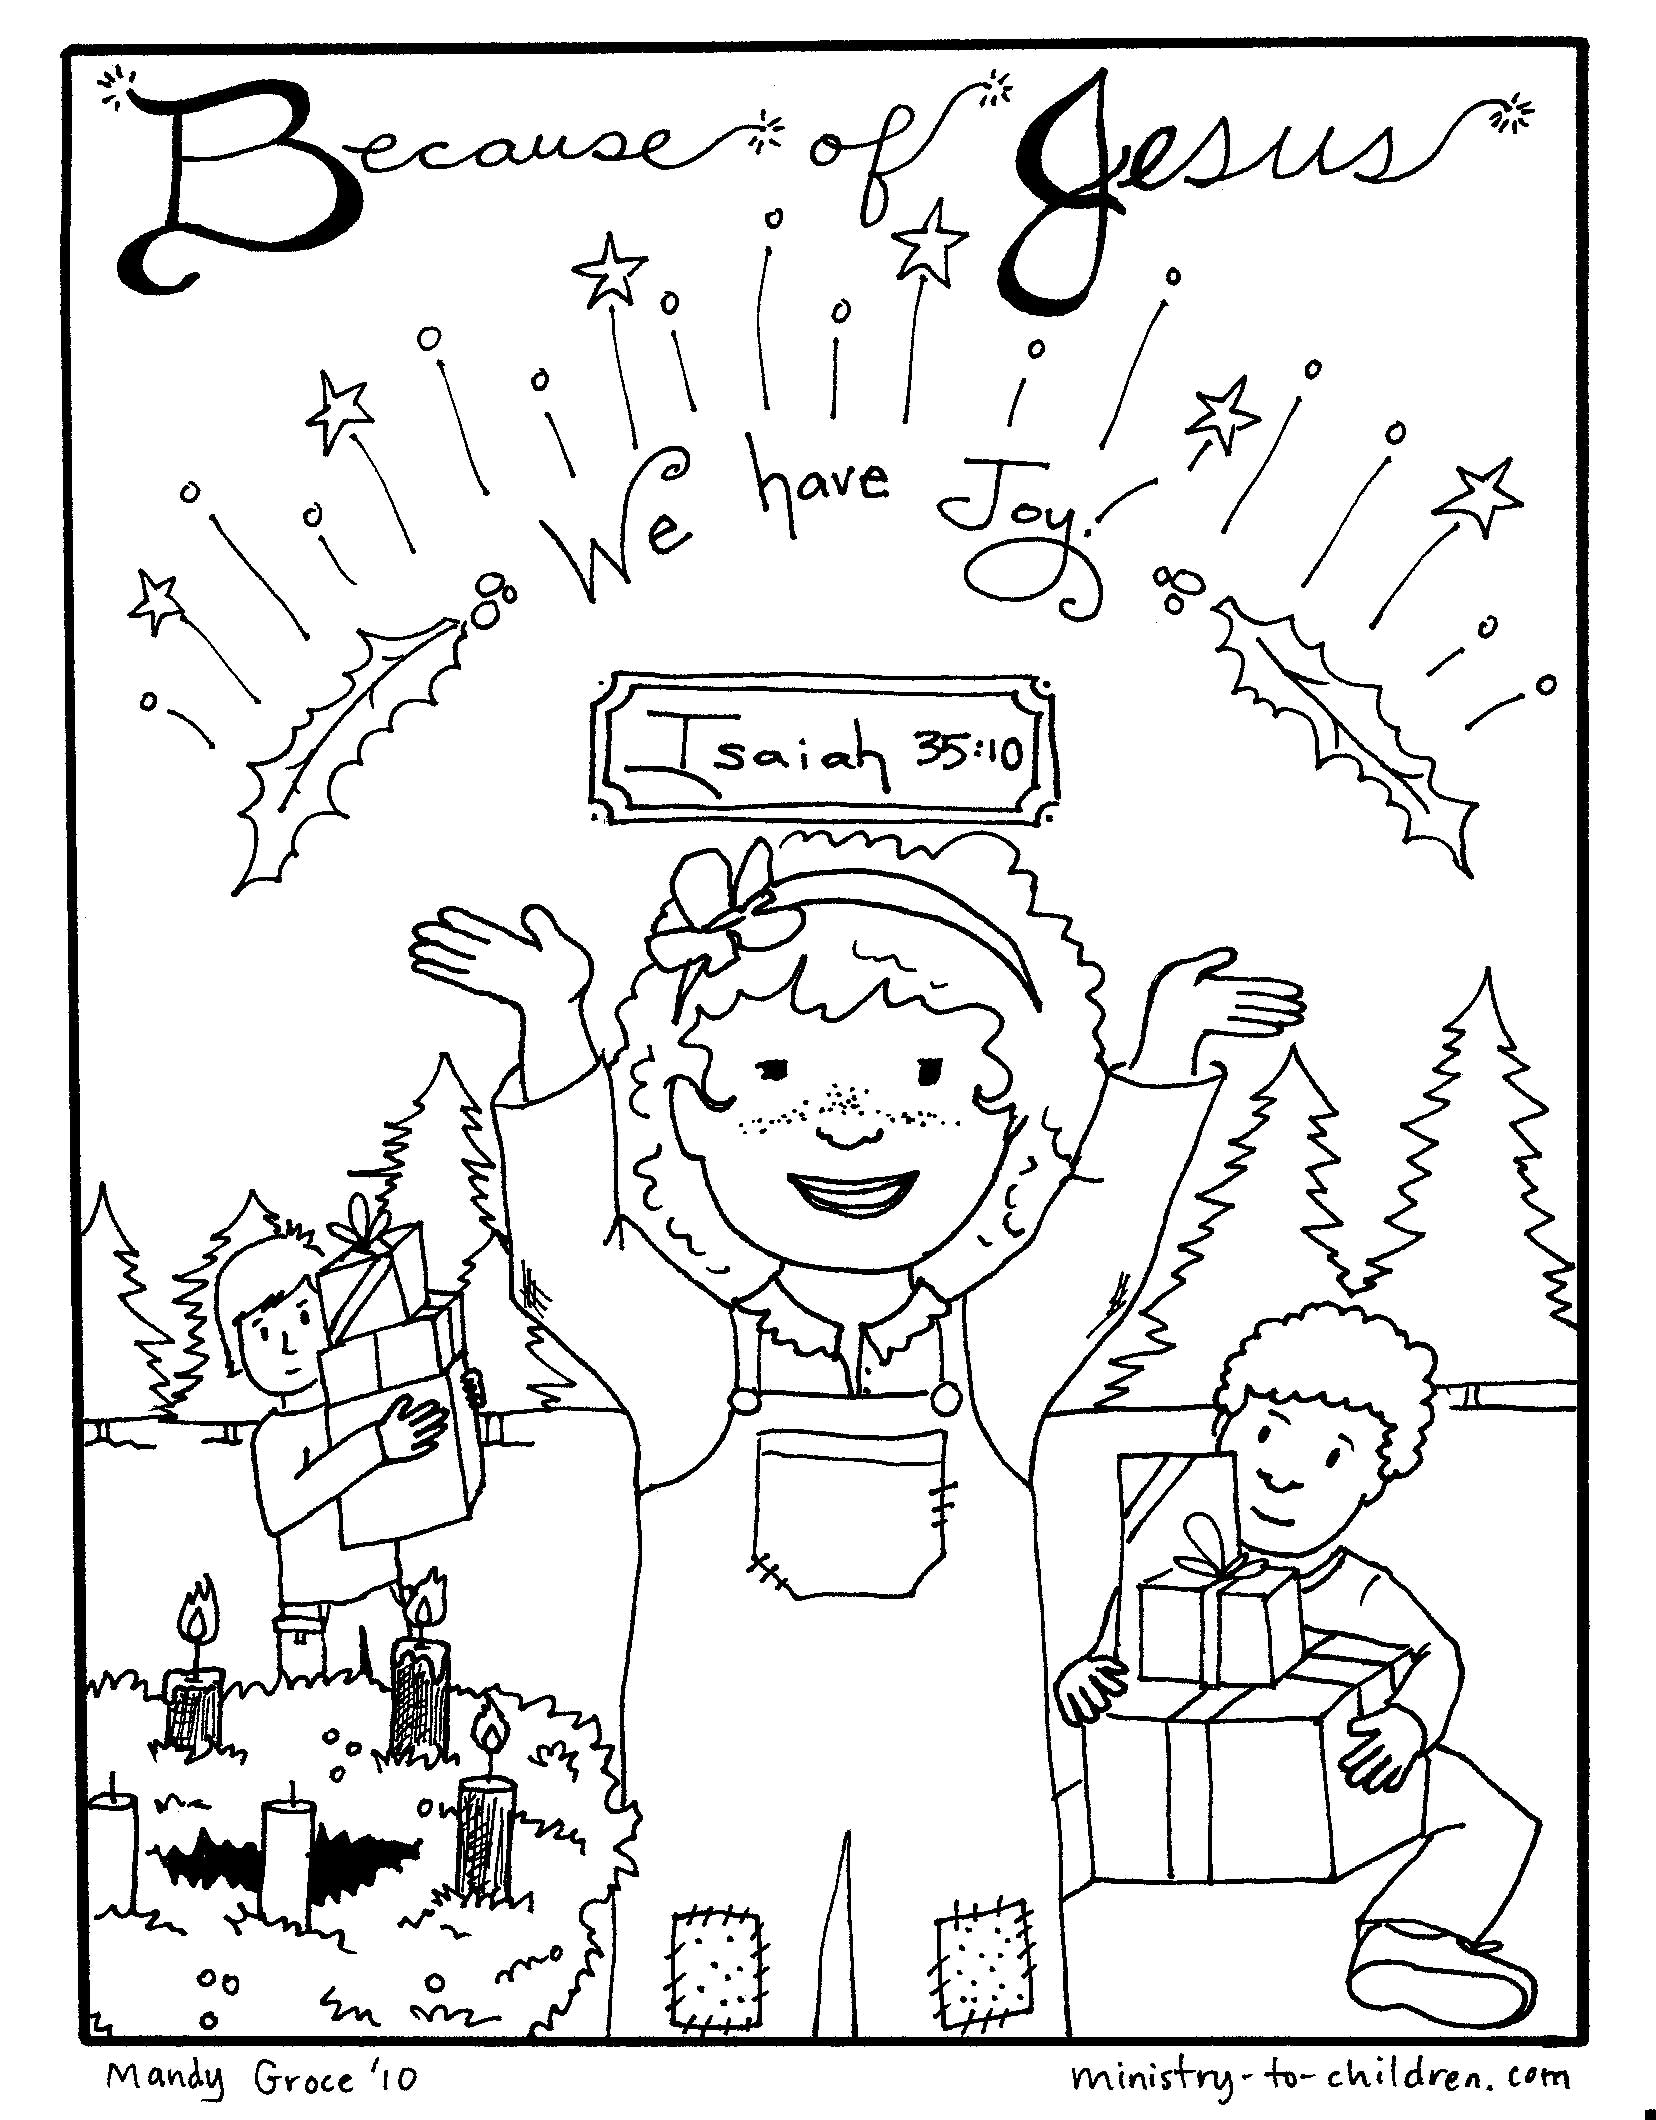 Advent coloring pages activities for kids â sunday school